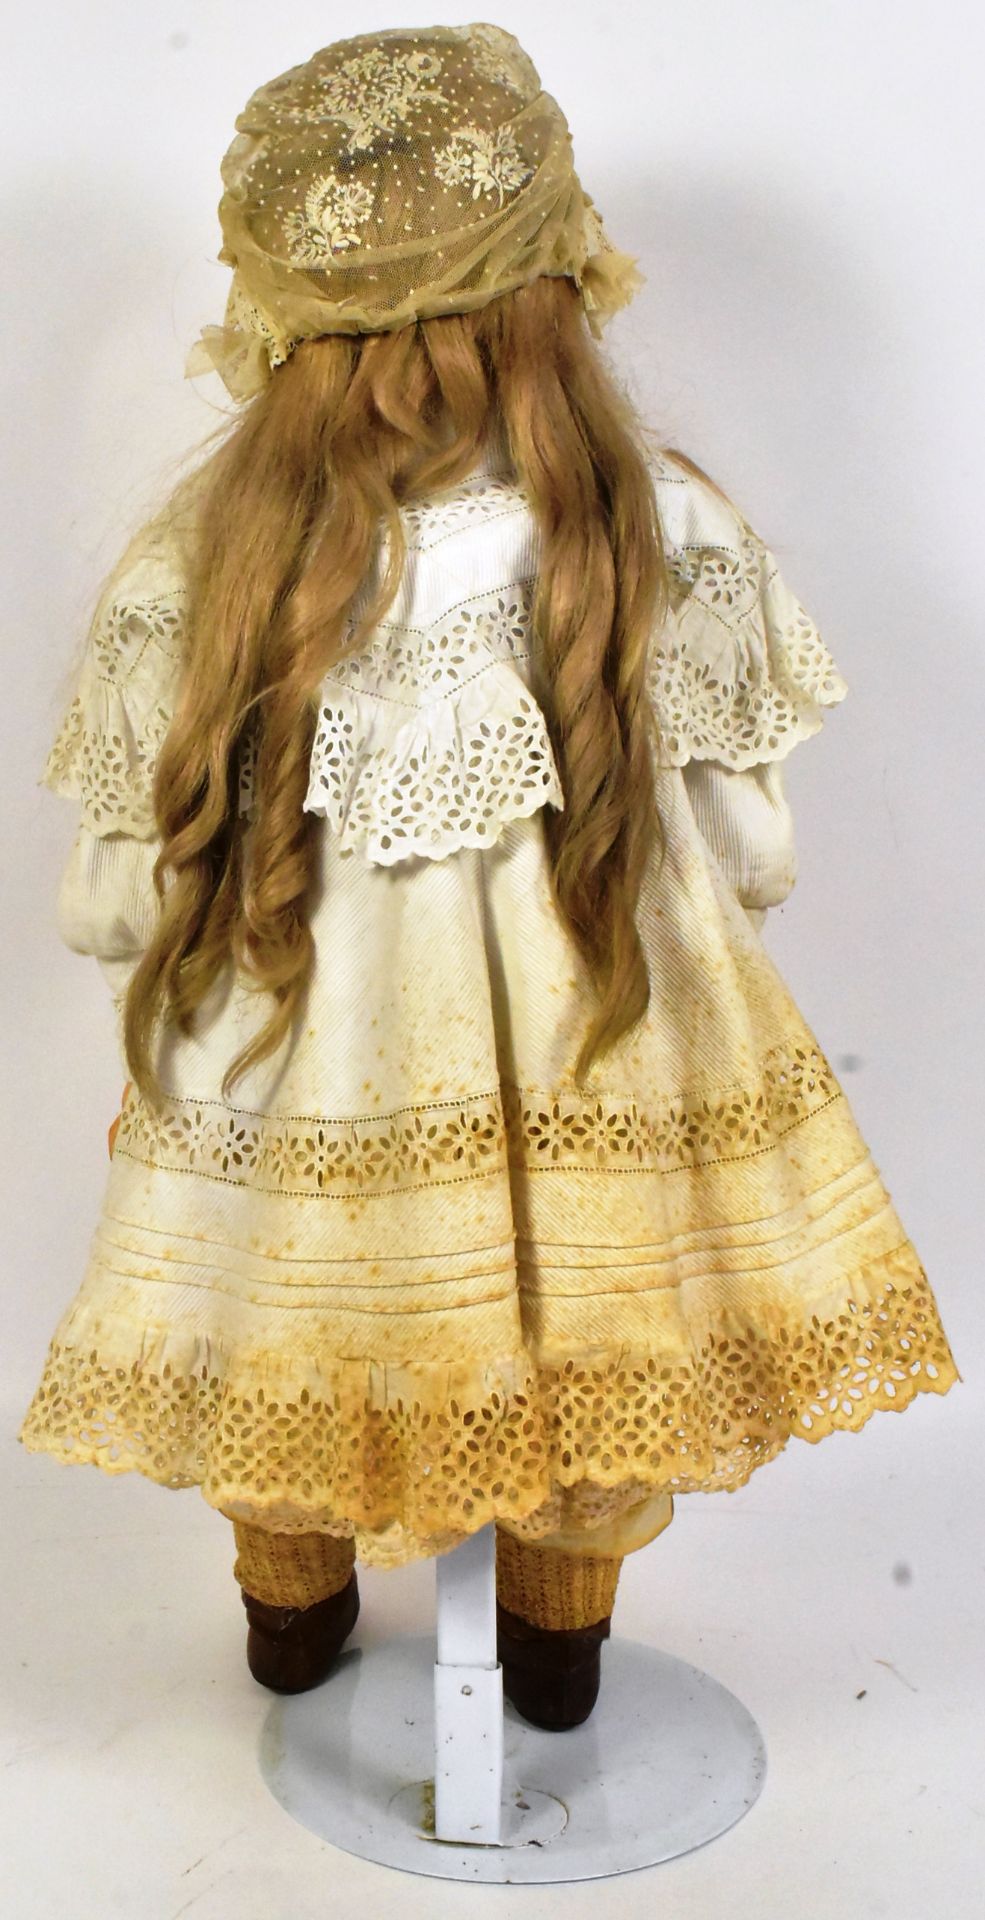 DOLLS - LARGE FRENCH JUMEAU BISQUE HEADED DOLL - Image 5 of 6